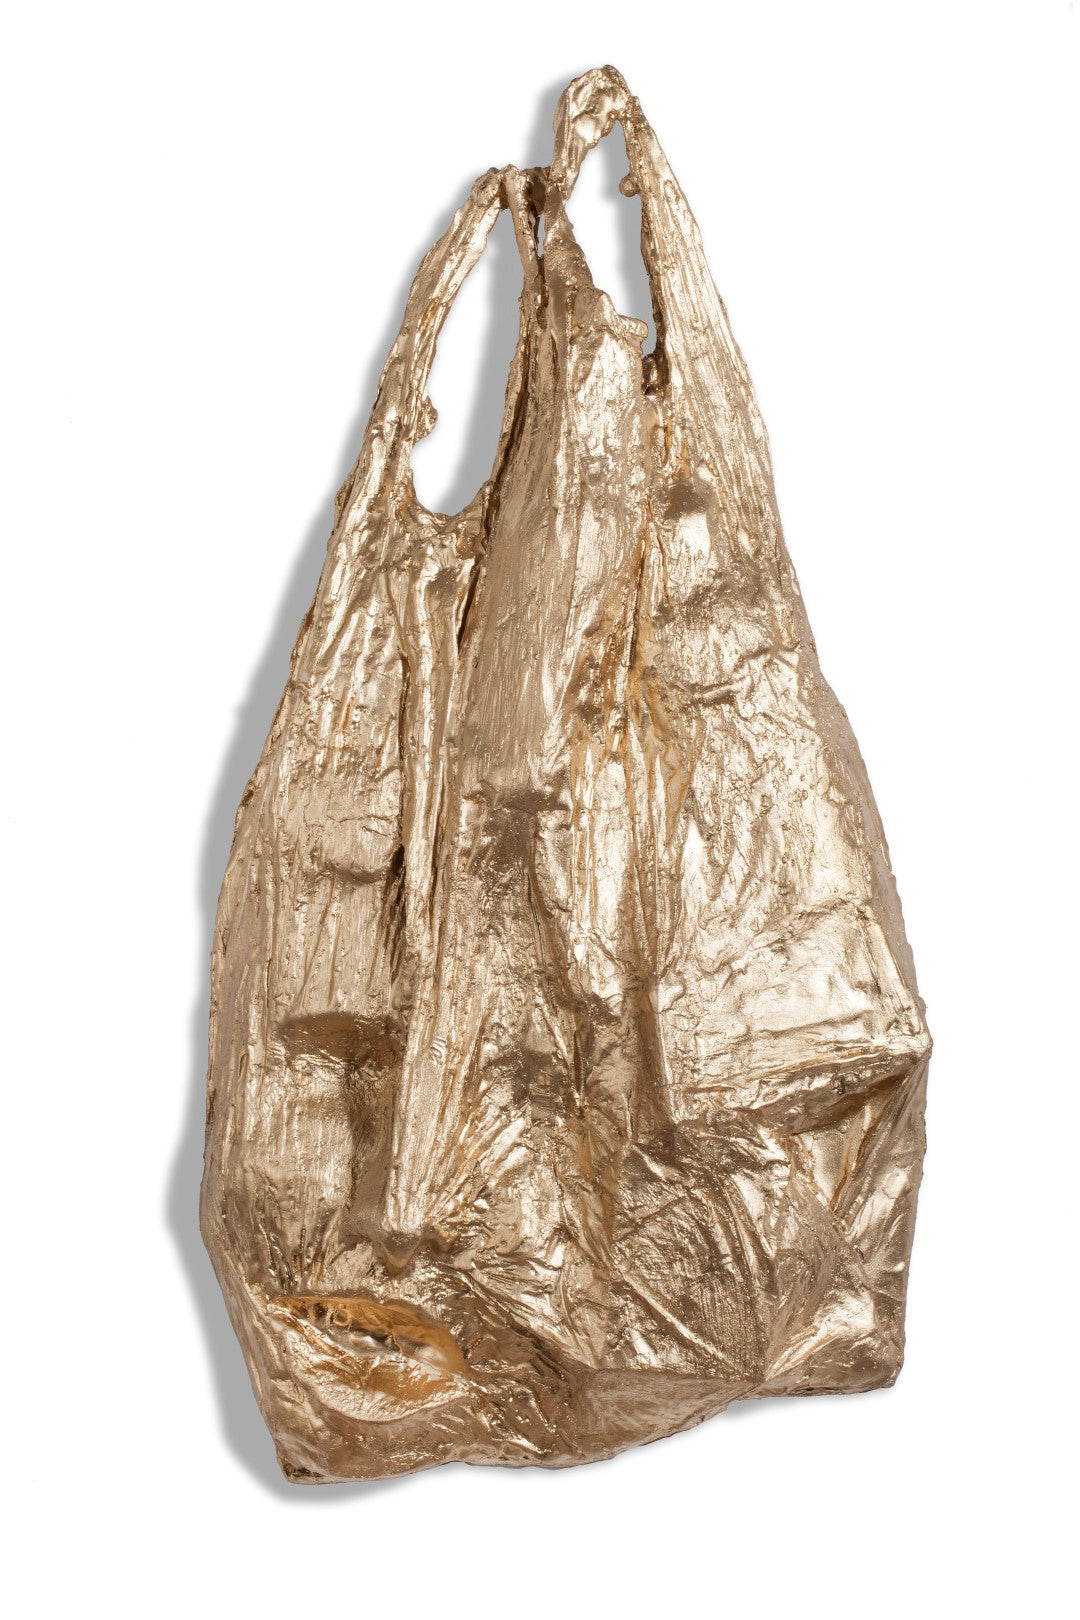 sculpture in bronze of plastic bags to address our consumer society